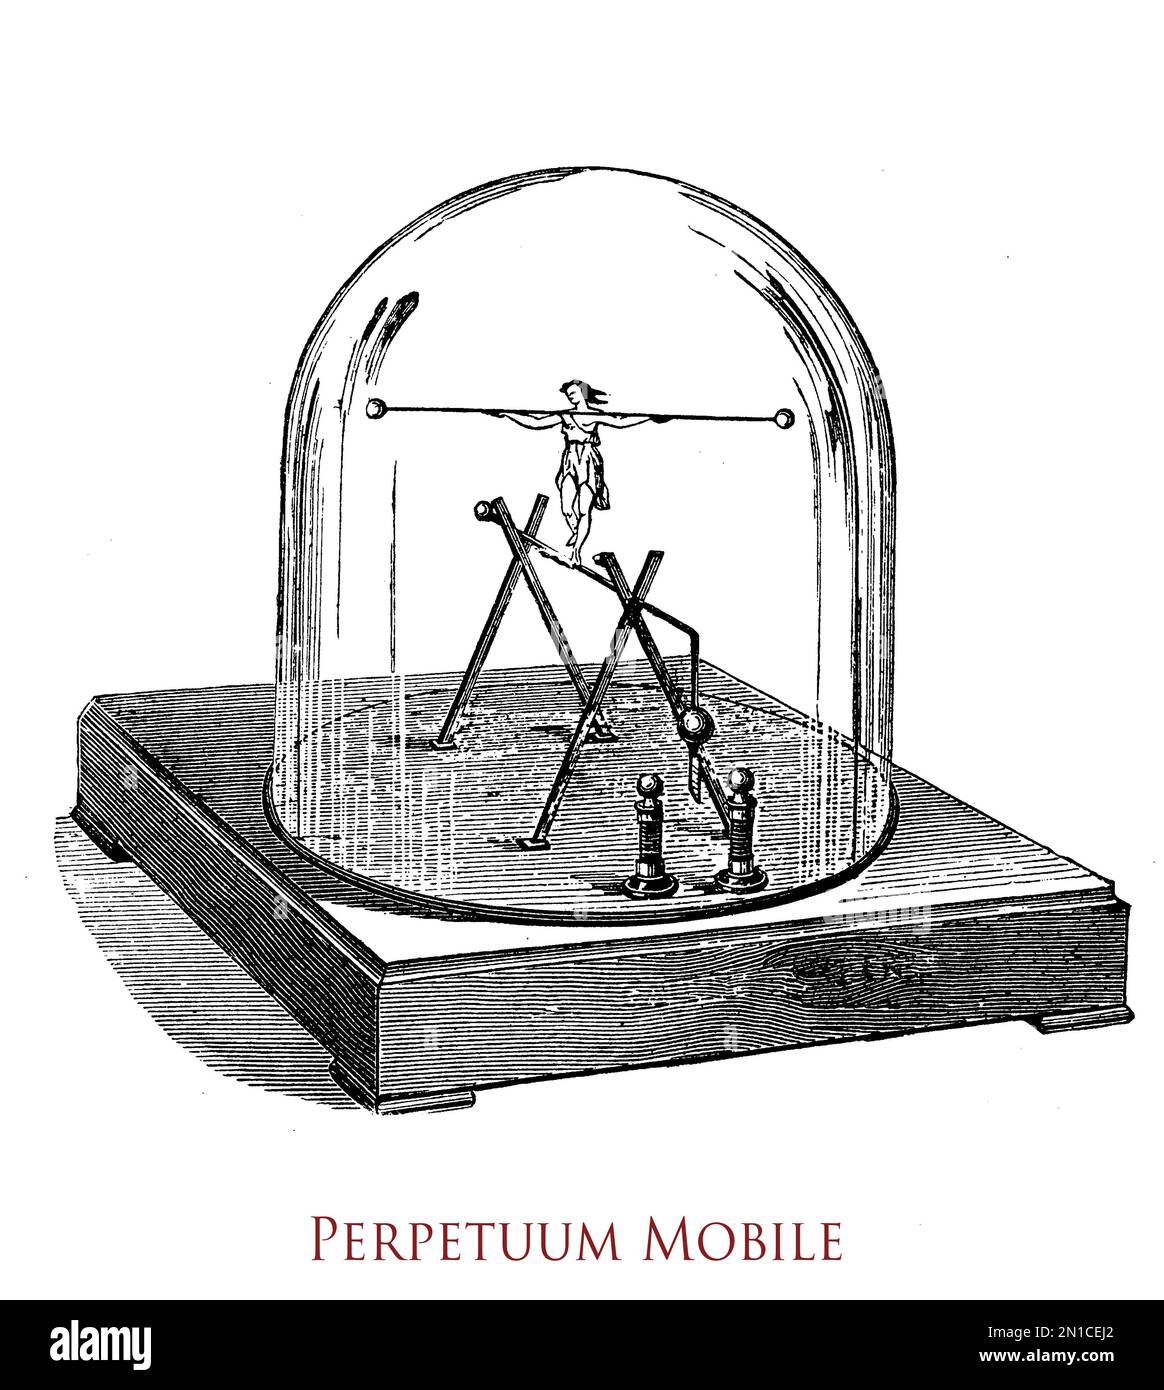 perpetuum mobile: attempt of a  hypothetical device working indefinitely without an external energy source in violation of thermodynamics laws Stock Photo